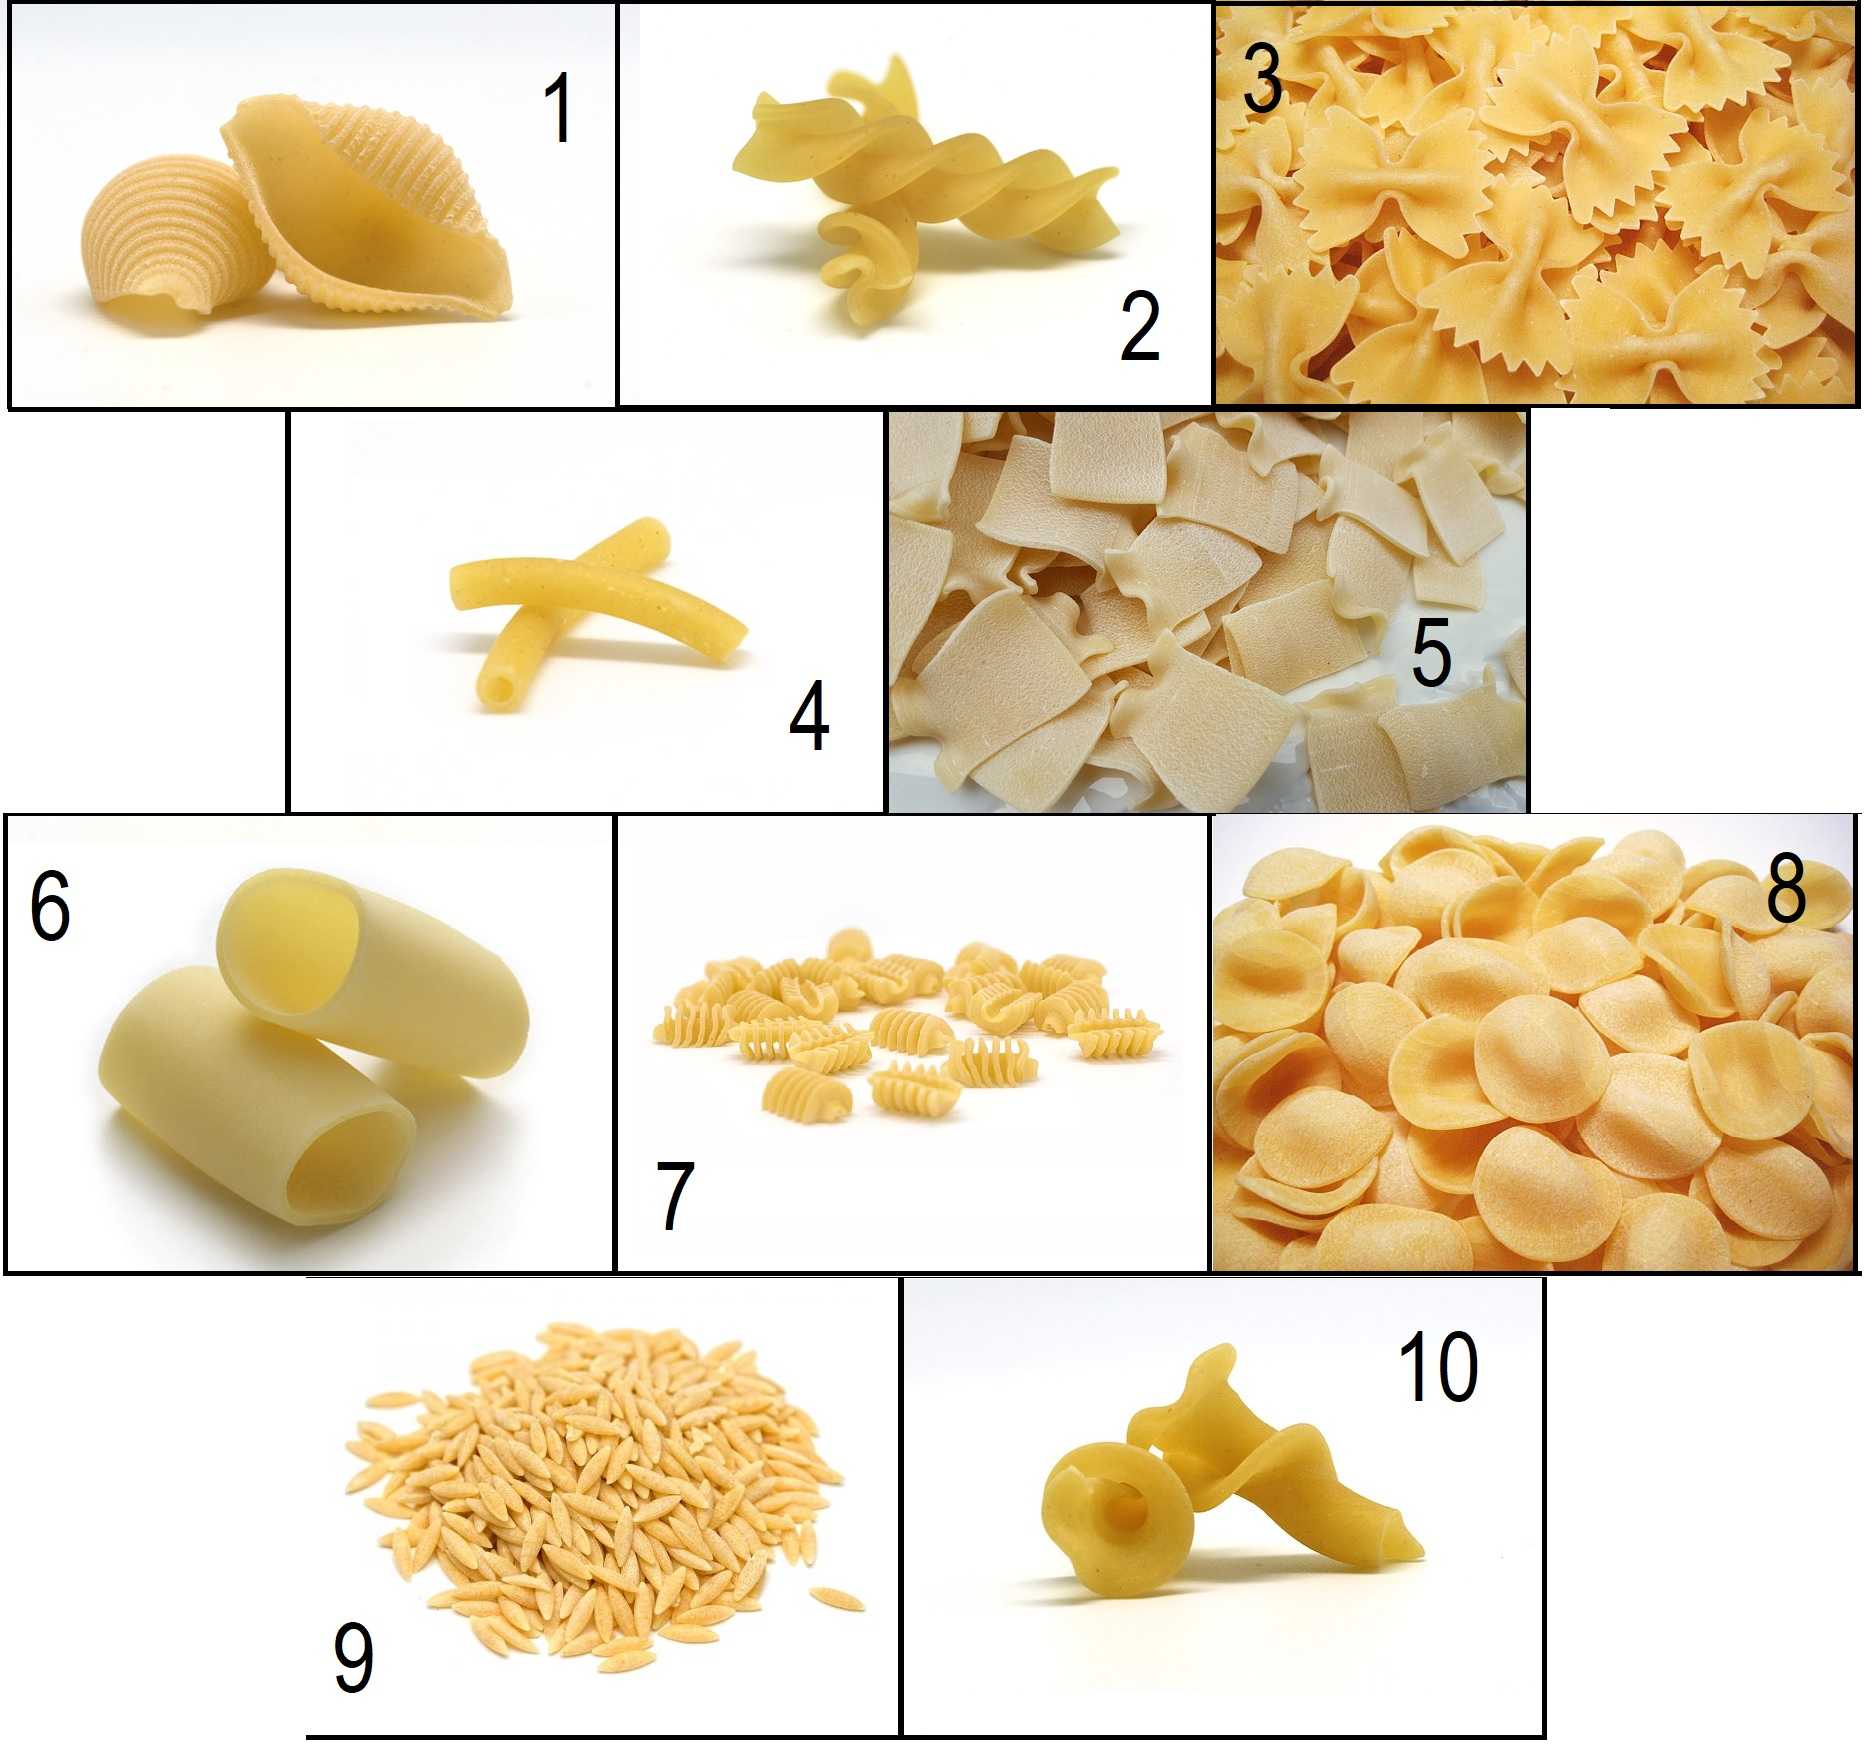 Which pasta shape is cylindrical and has ridges?